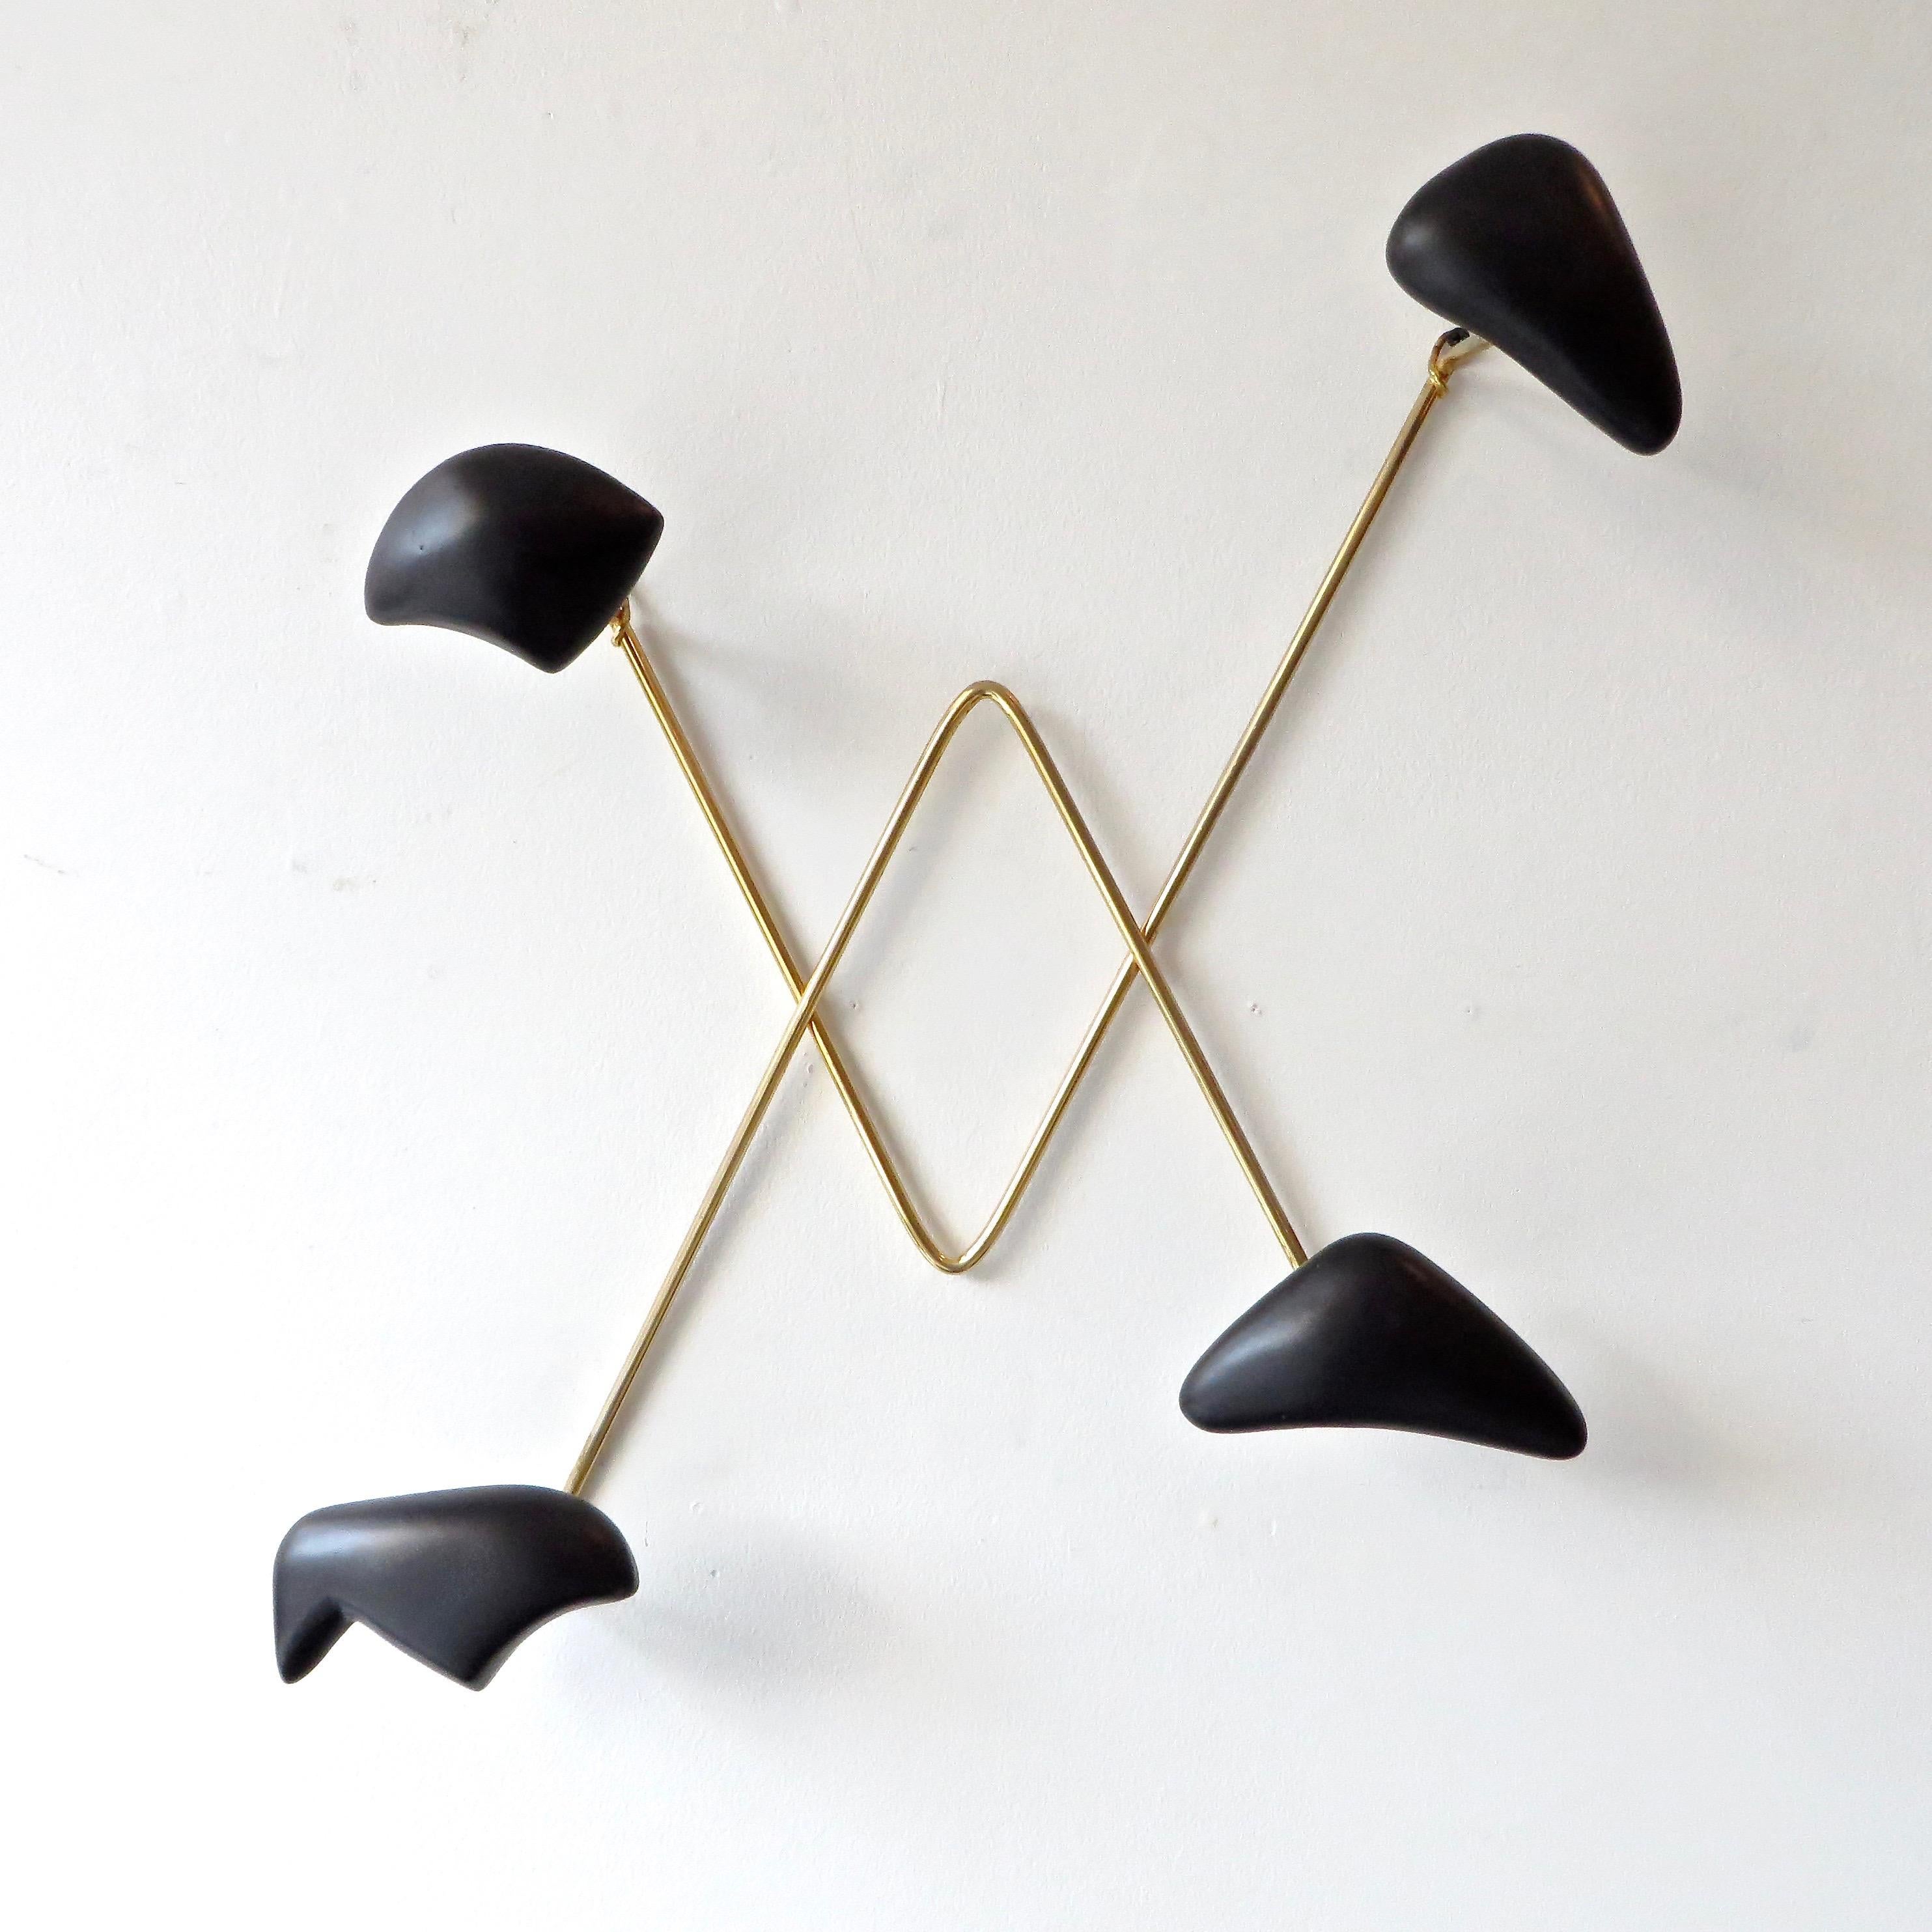 Wall-mounted coat or hat rack by Georges Jouve, produced by Marcel Asselbur, France, circa 1950. Black matte glazed ceramic with brass frame. 
Excellent condition with no chips or restorations. 
